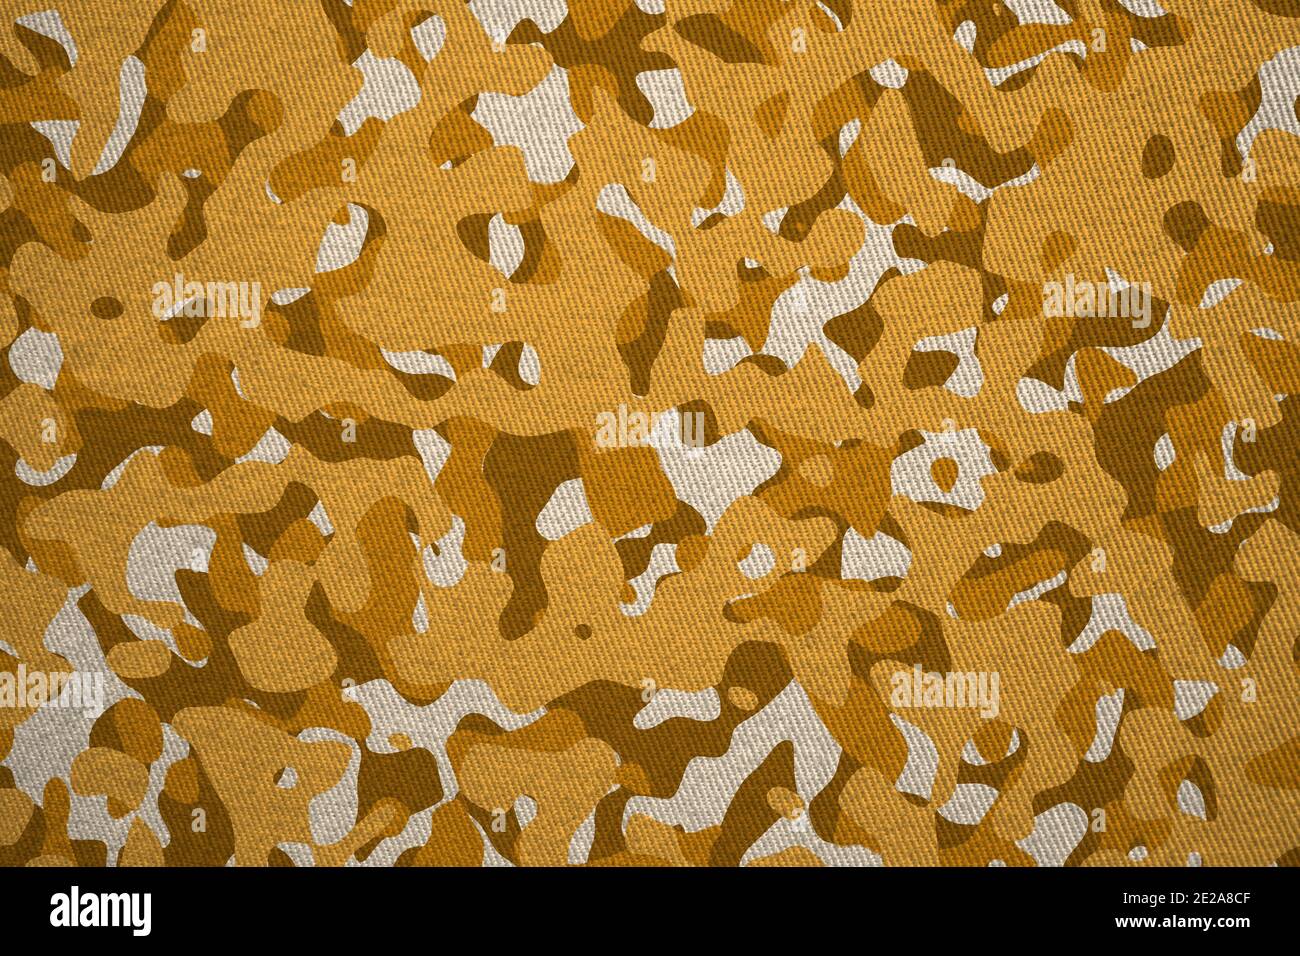 Brown, yellow, white military camouflage background. Military uniform texture background illustration Stock Photo